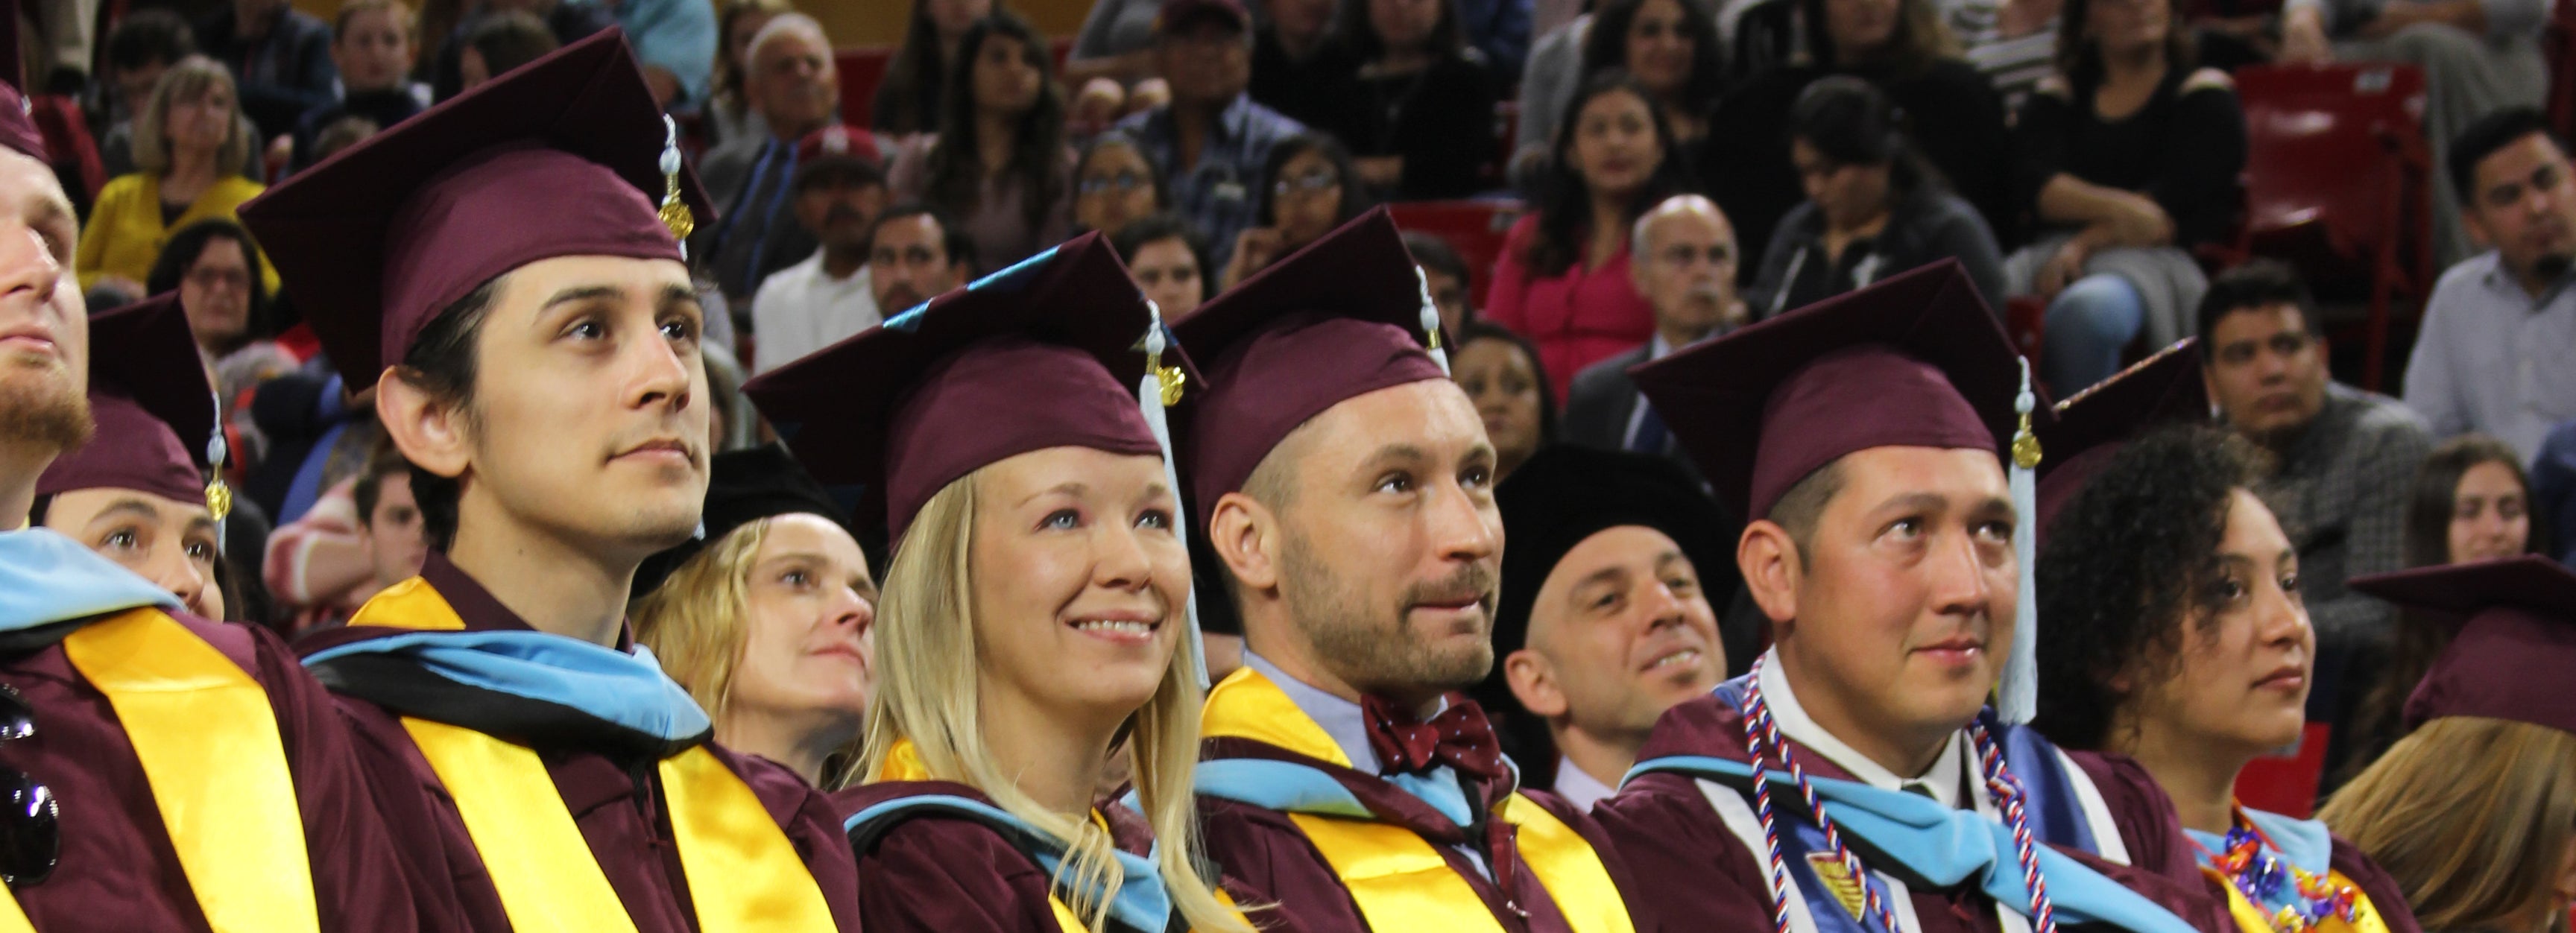 Image of graduates seated at convocation